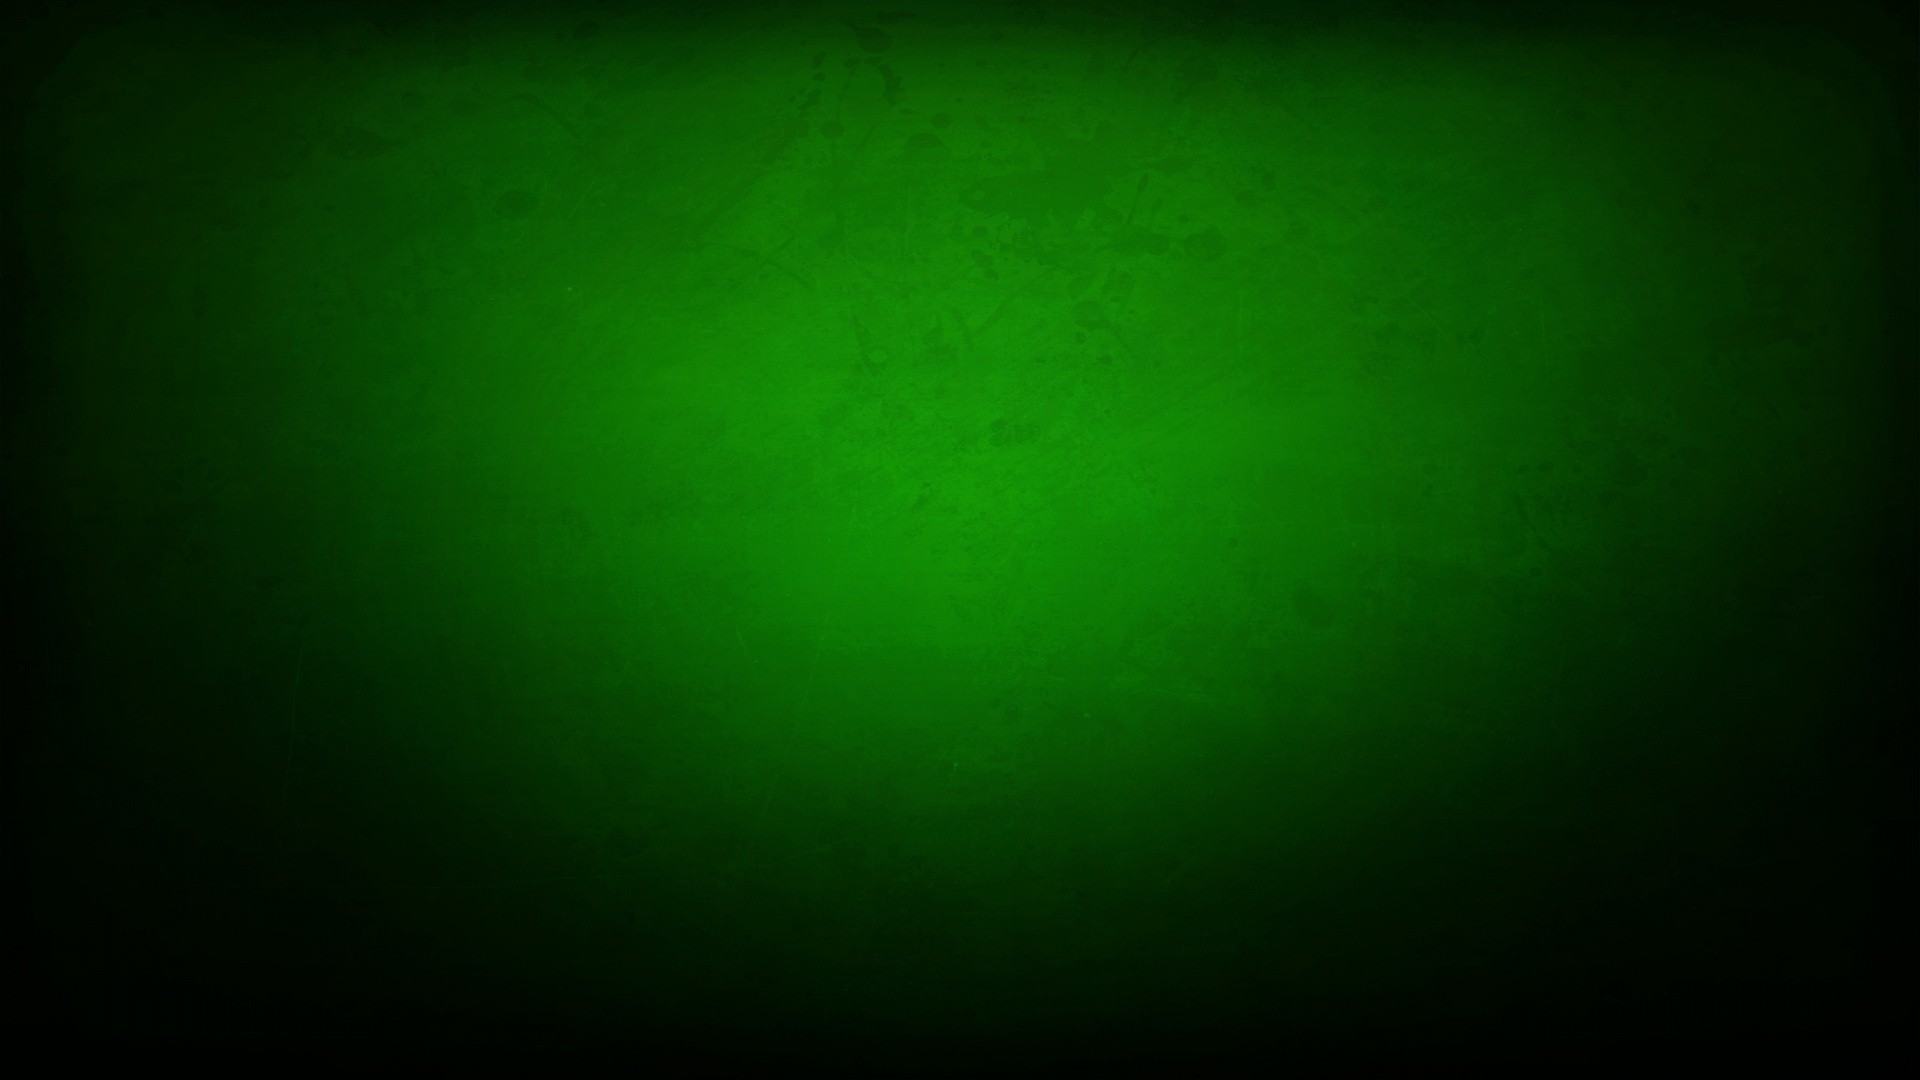 Wallpapers Computer Dark Green With Resolution 1920X1080 pixel. You can make this wallpaper for your Desktop Computer Backgrounds, Mac Wallpapers, Android Lock screen or iPhone Screensavers